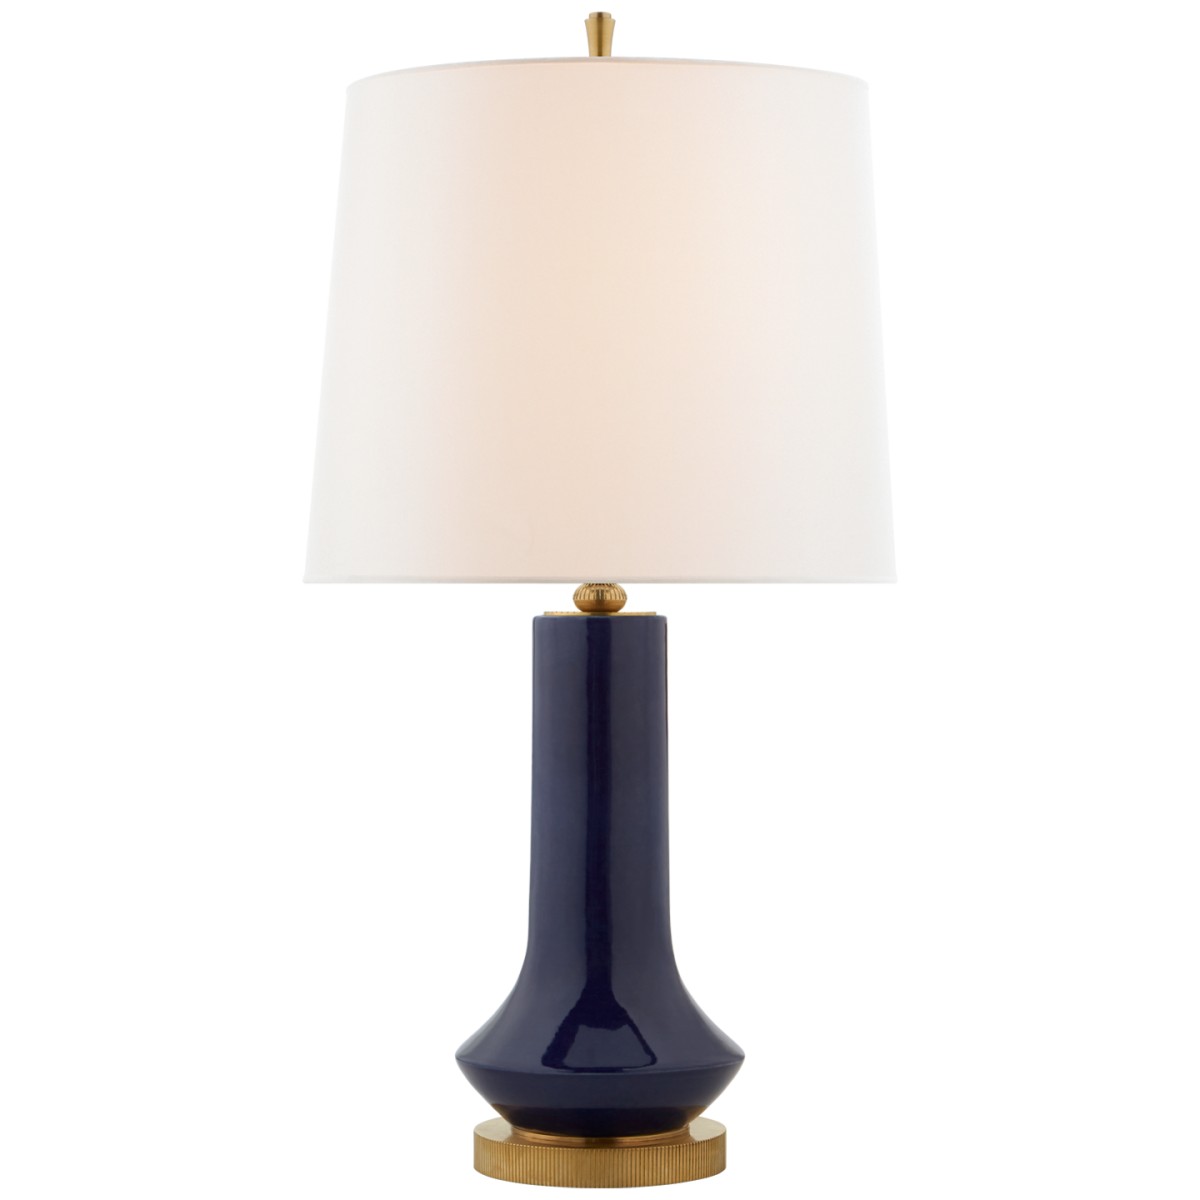 Luisa Large Table Lamp with Linen Shade